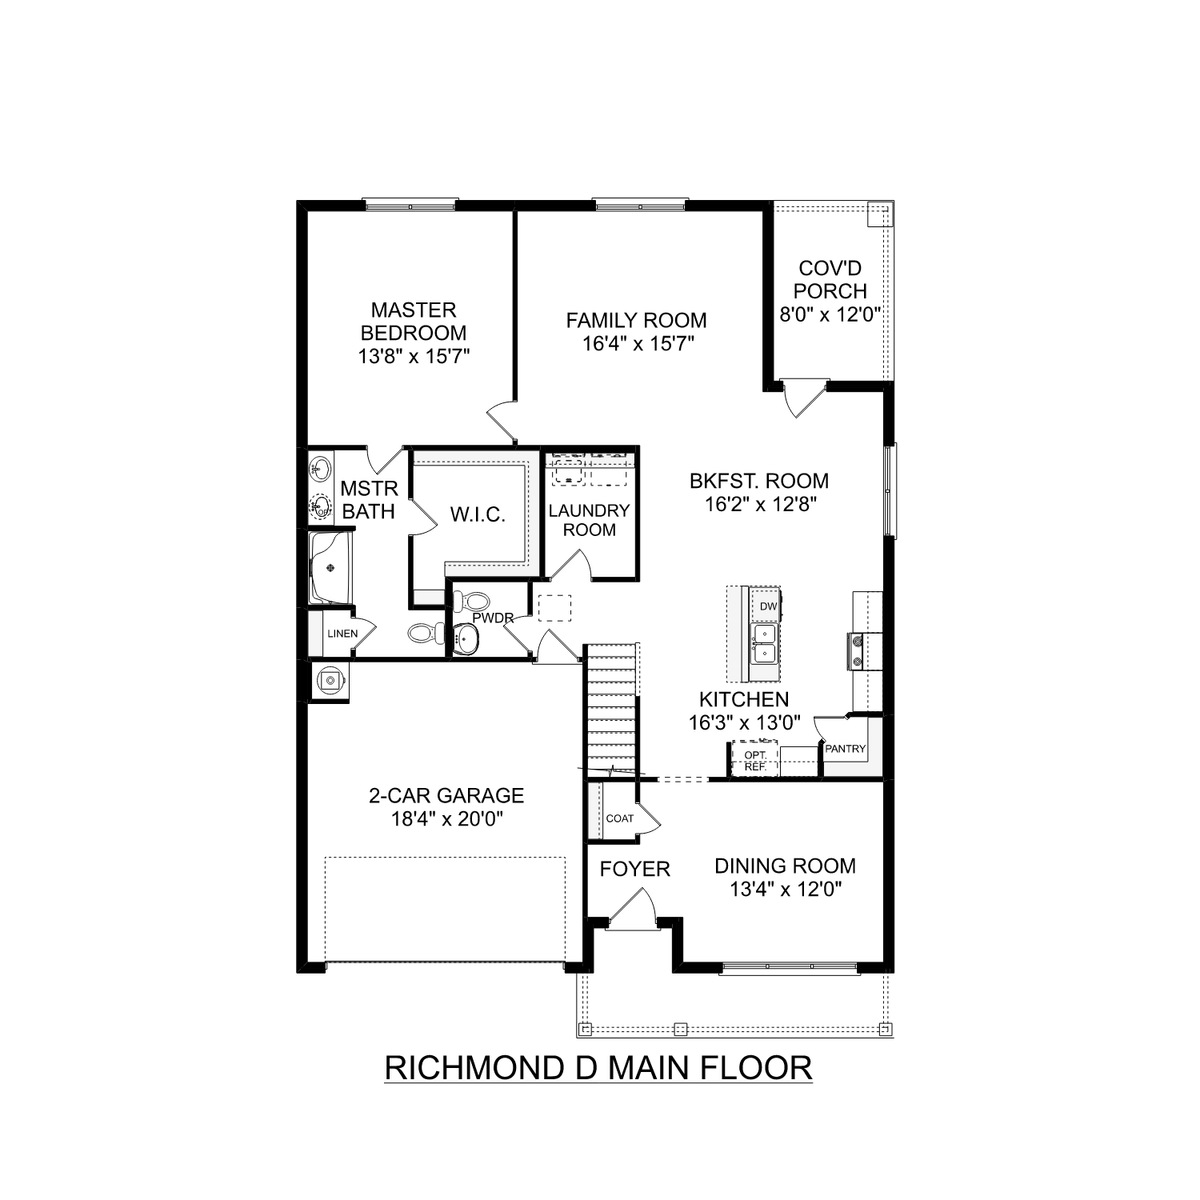 1 - The Richmond D buildable floor plan layout in Davidson Homes' Wood Trail community.